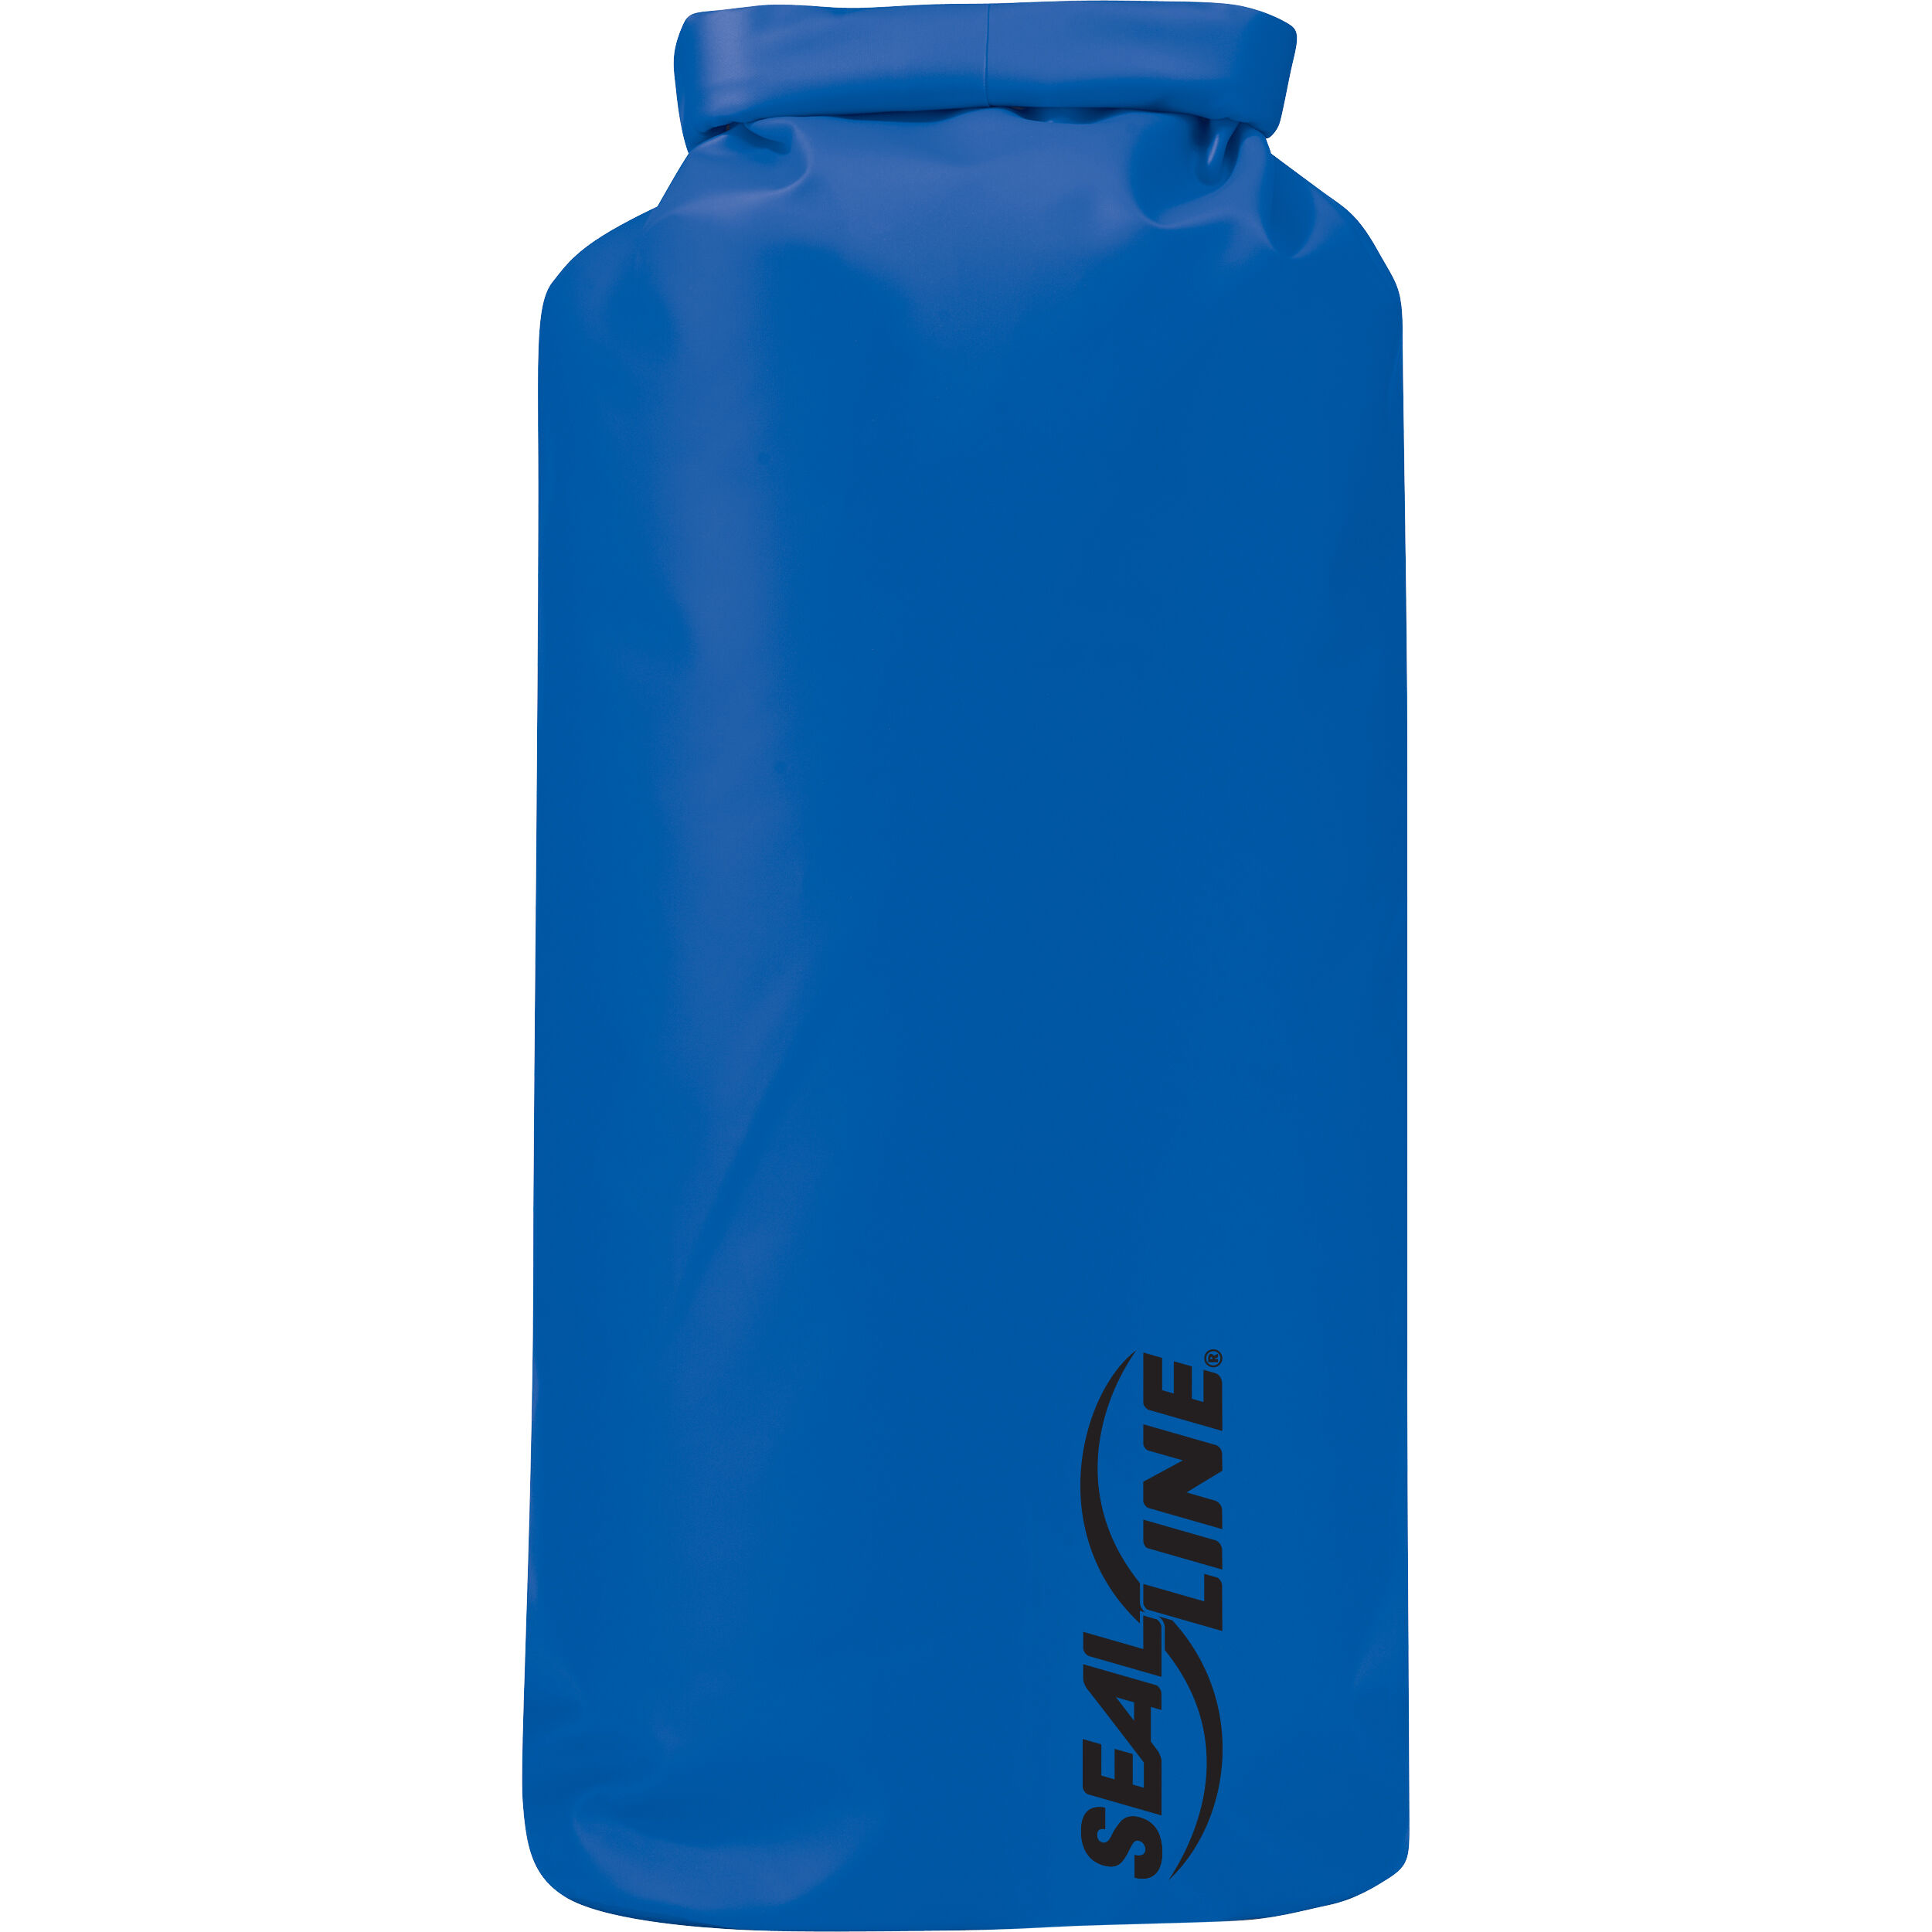 Discovery™ Dry Bag | Essential Dry Bag Protection | SealLine